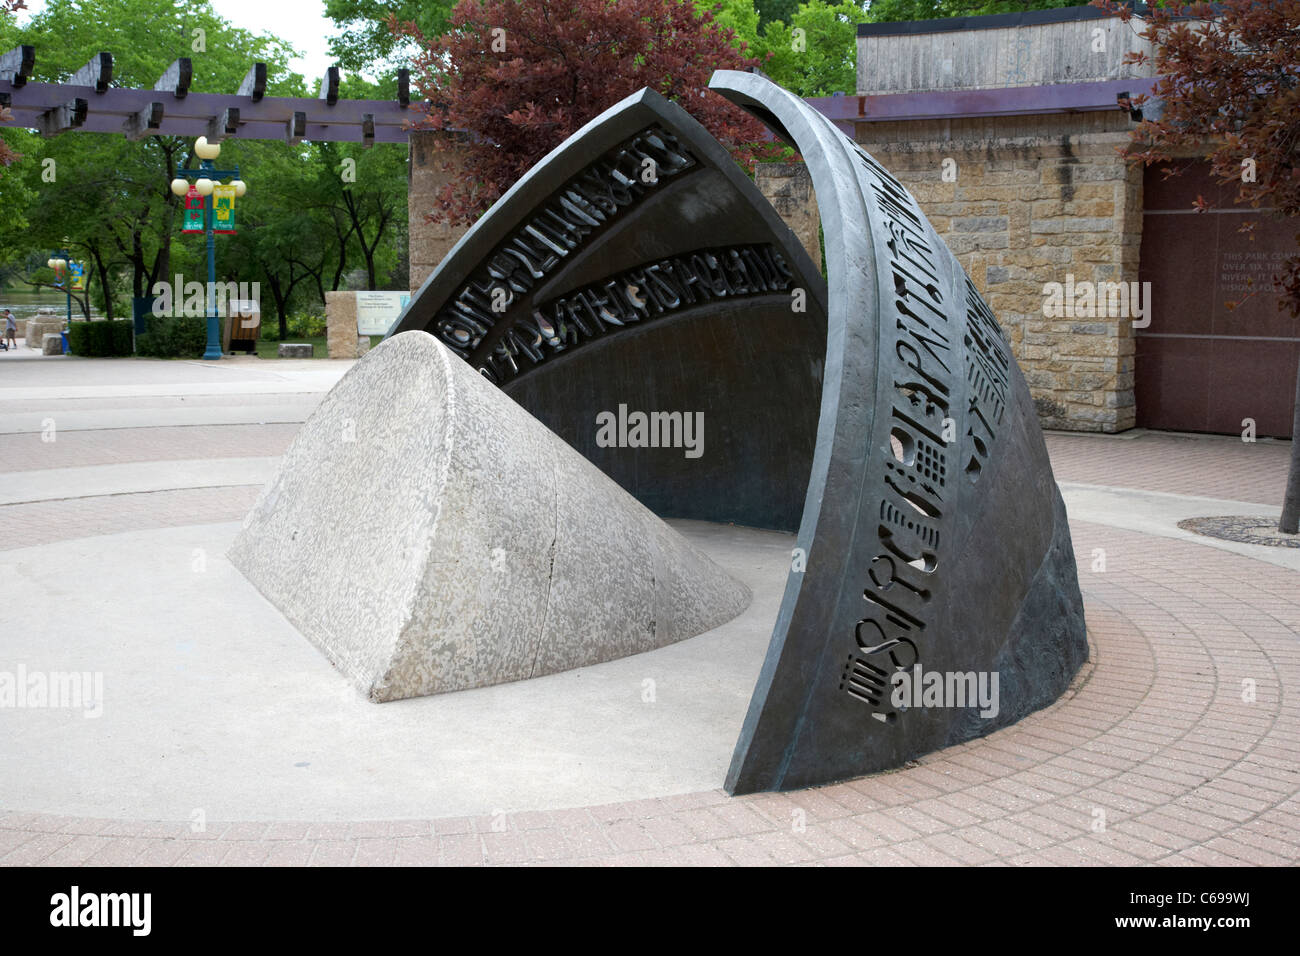 the path through time sculpture at the wall through time at the forks Winnipeg Manitoba Canada Stock Photo